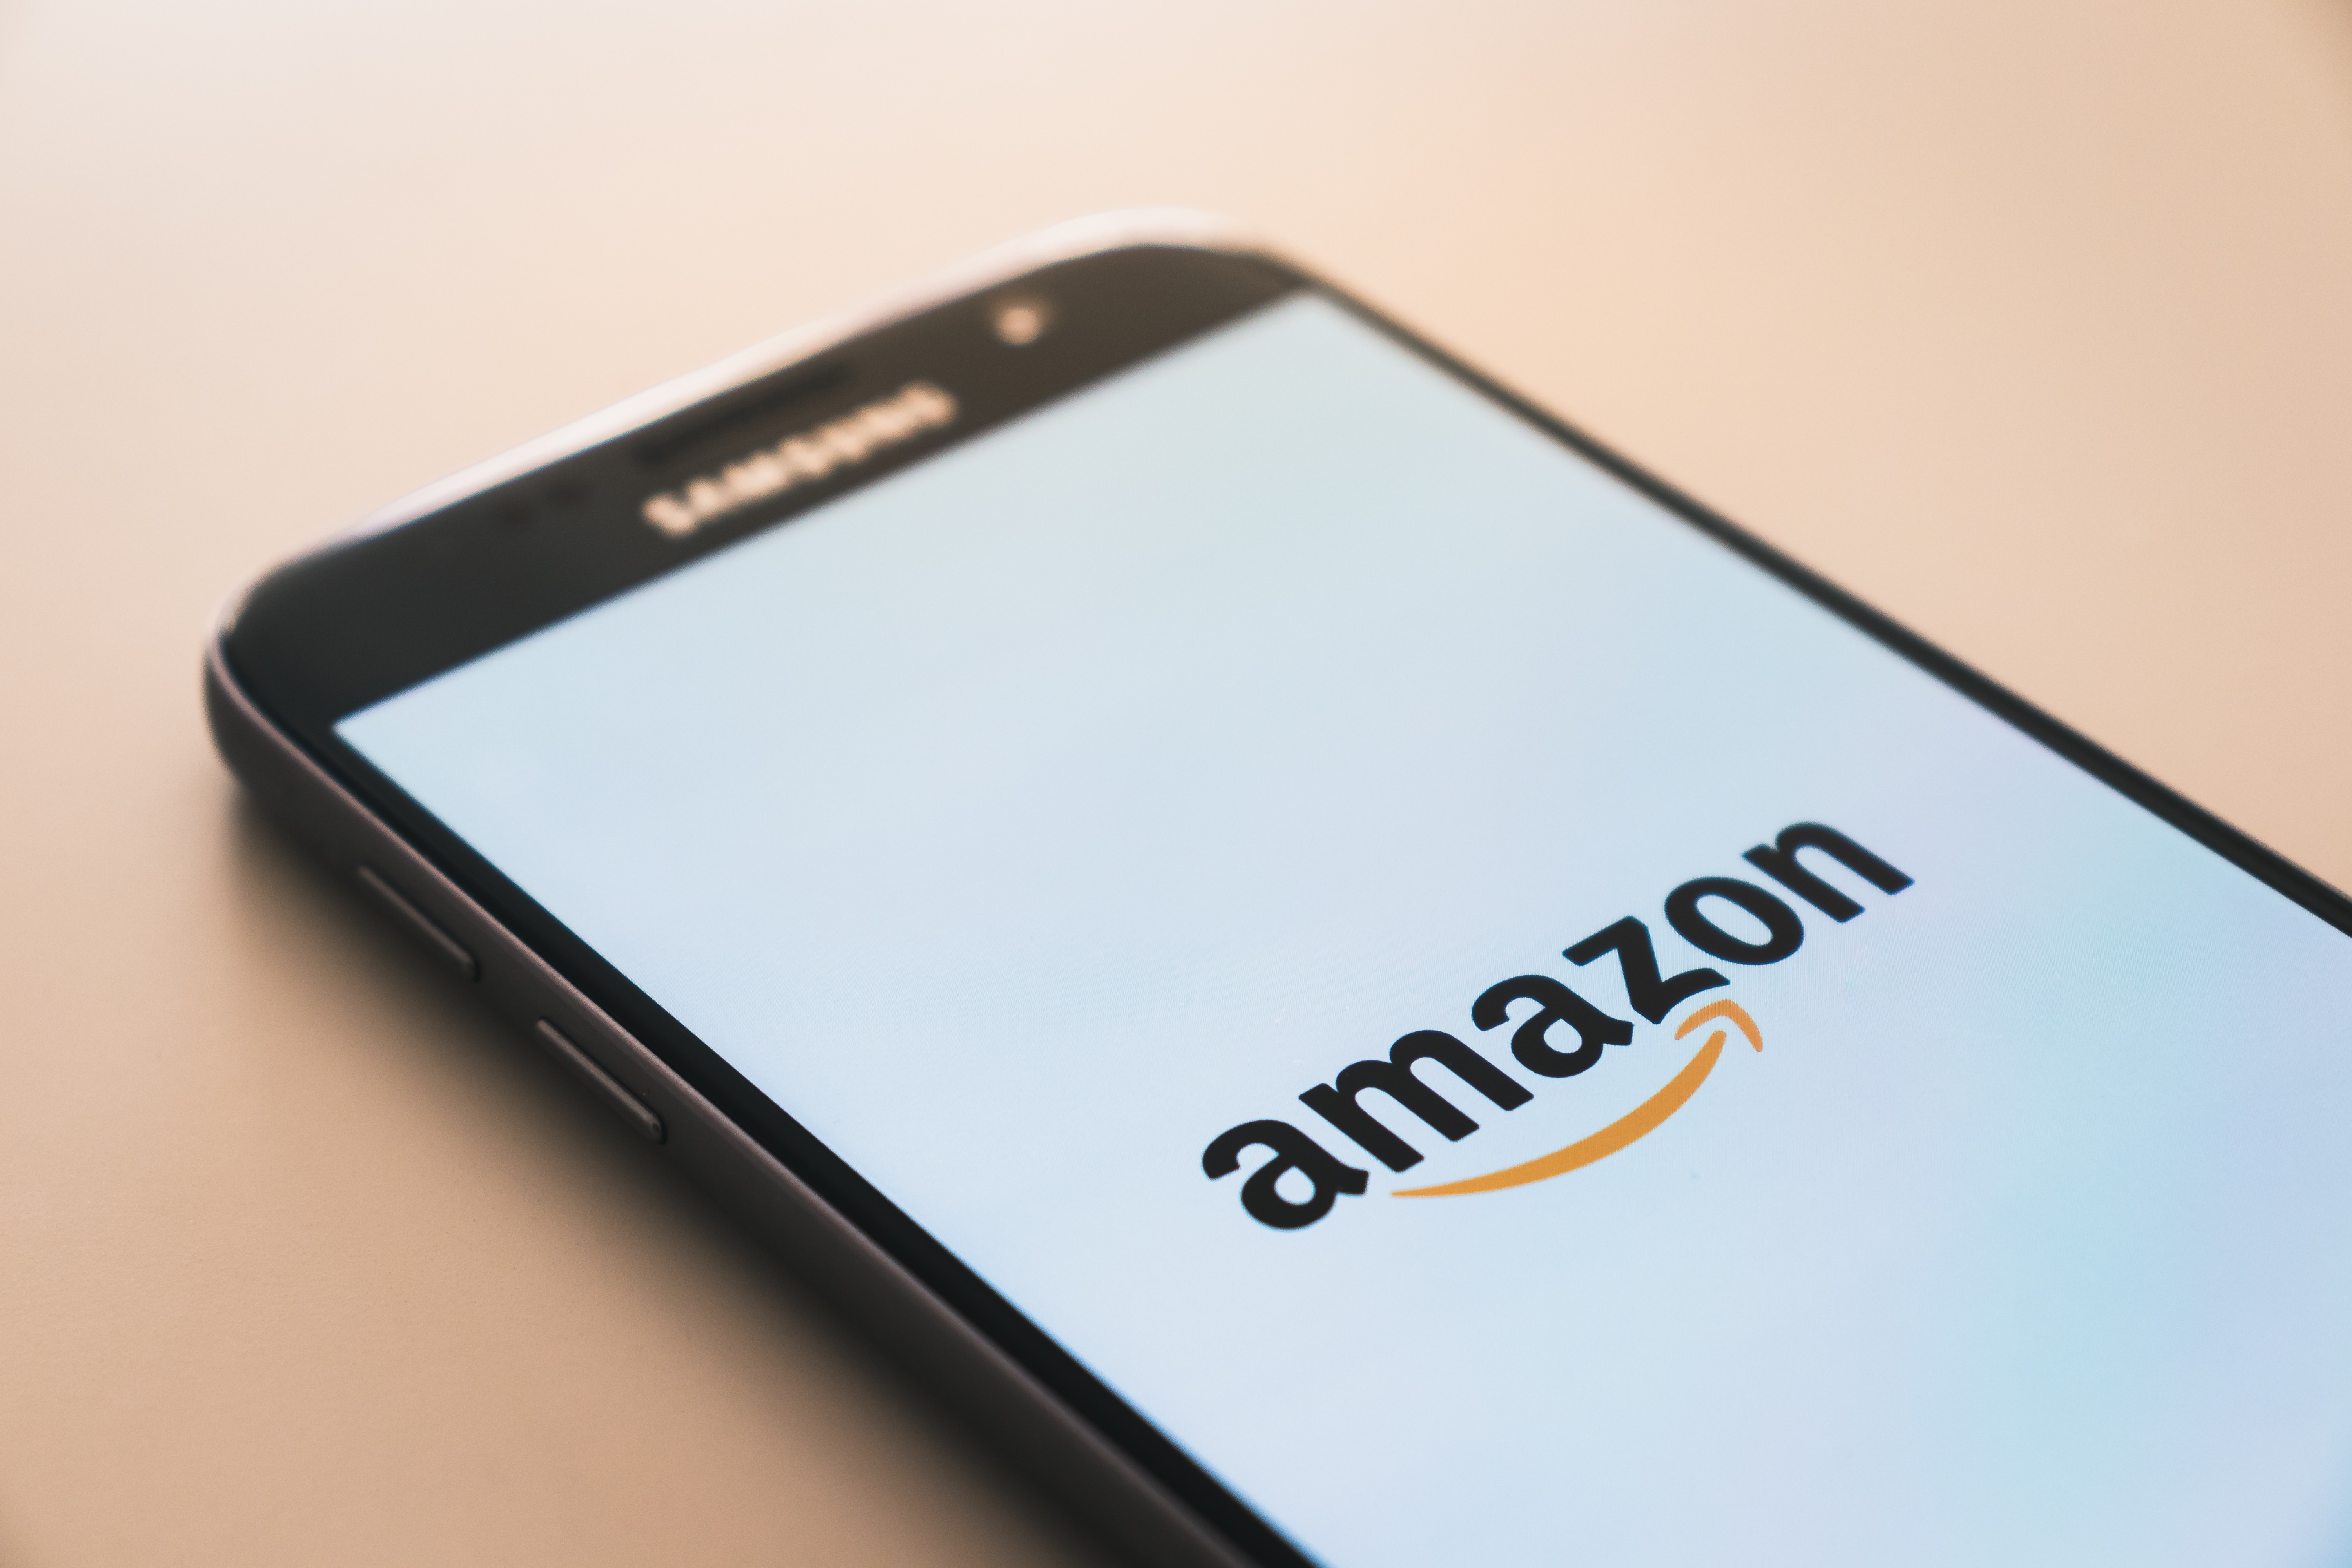 Is Amazon Prime offering free or low-price mobile service for members